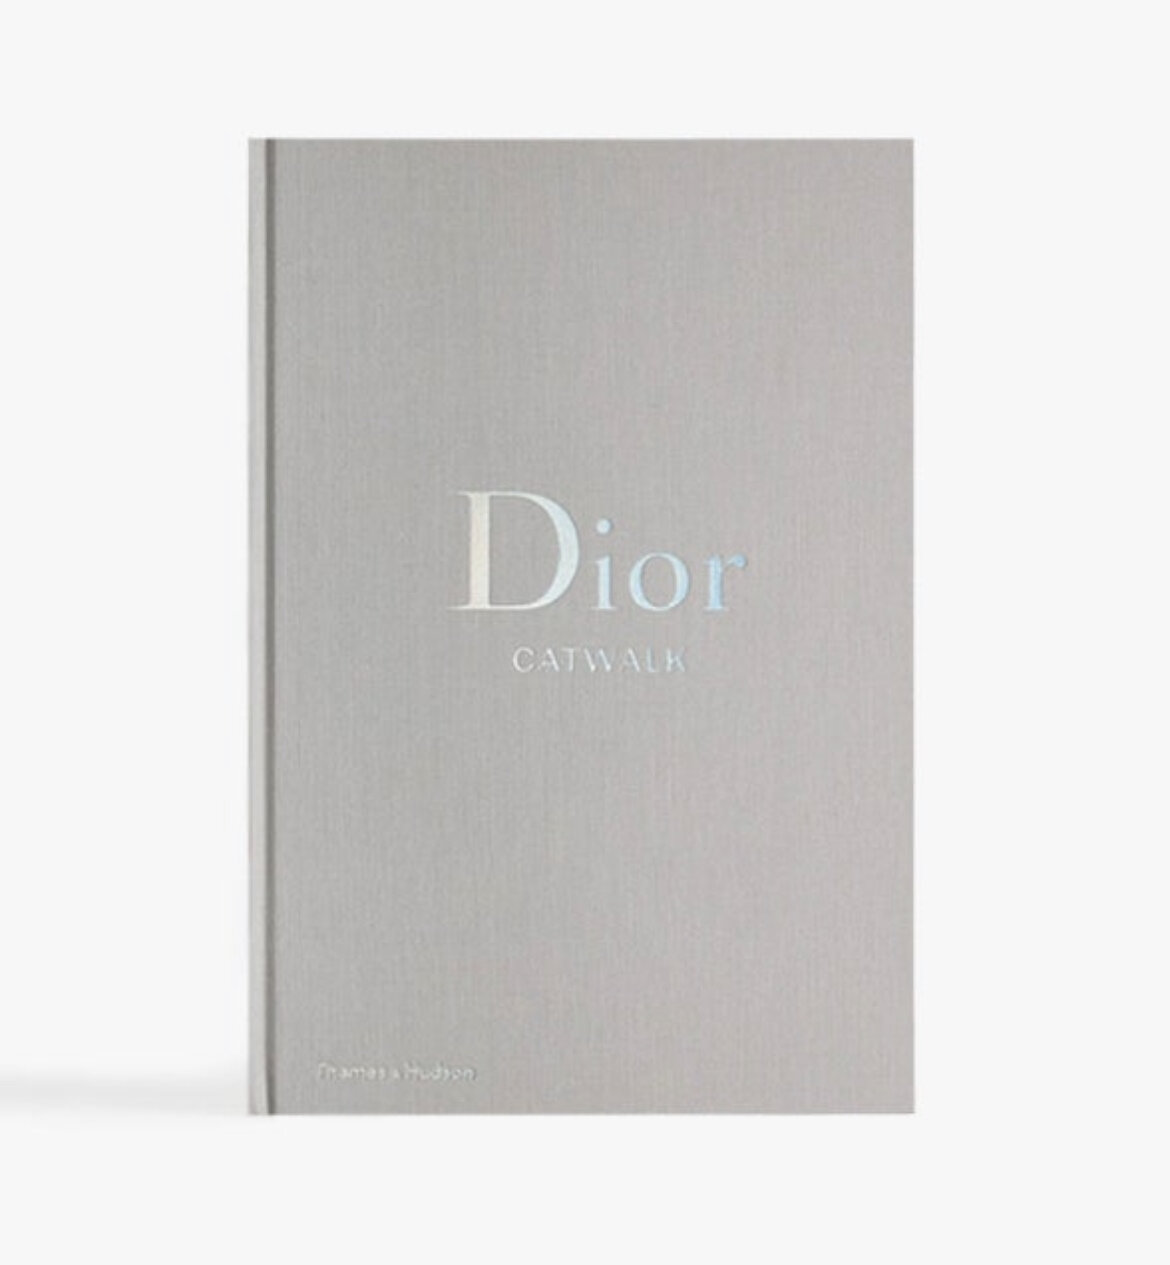 Dior catwalk coffee table book — THE VIRTUE